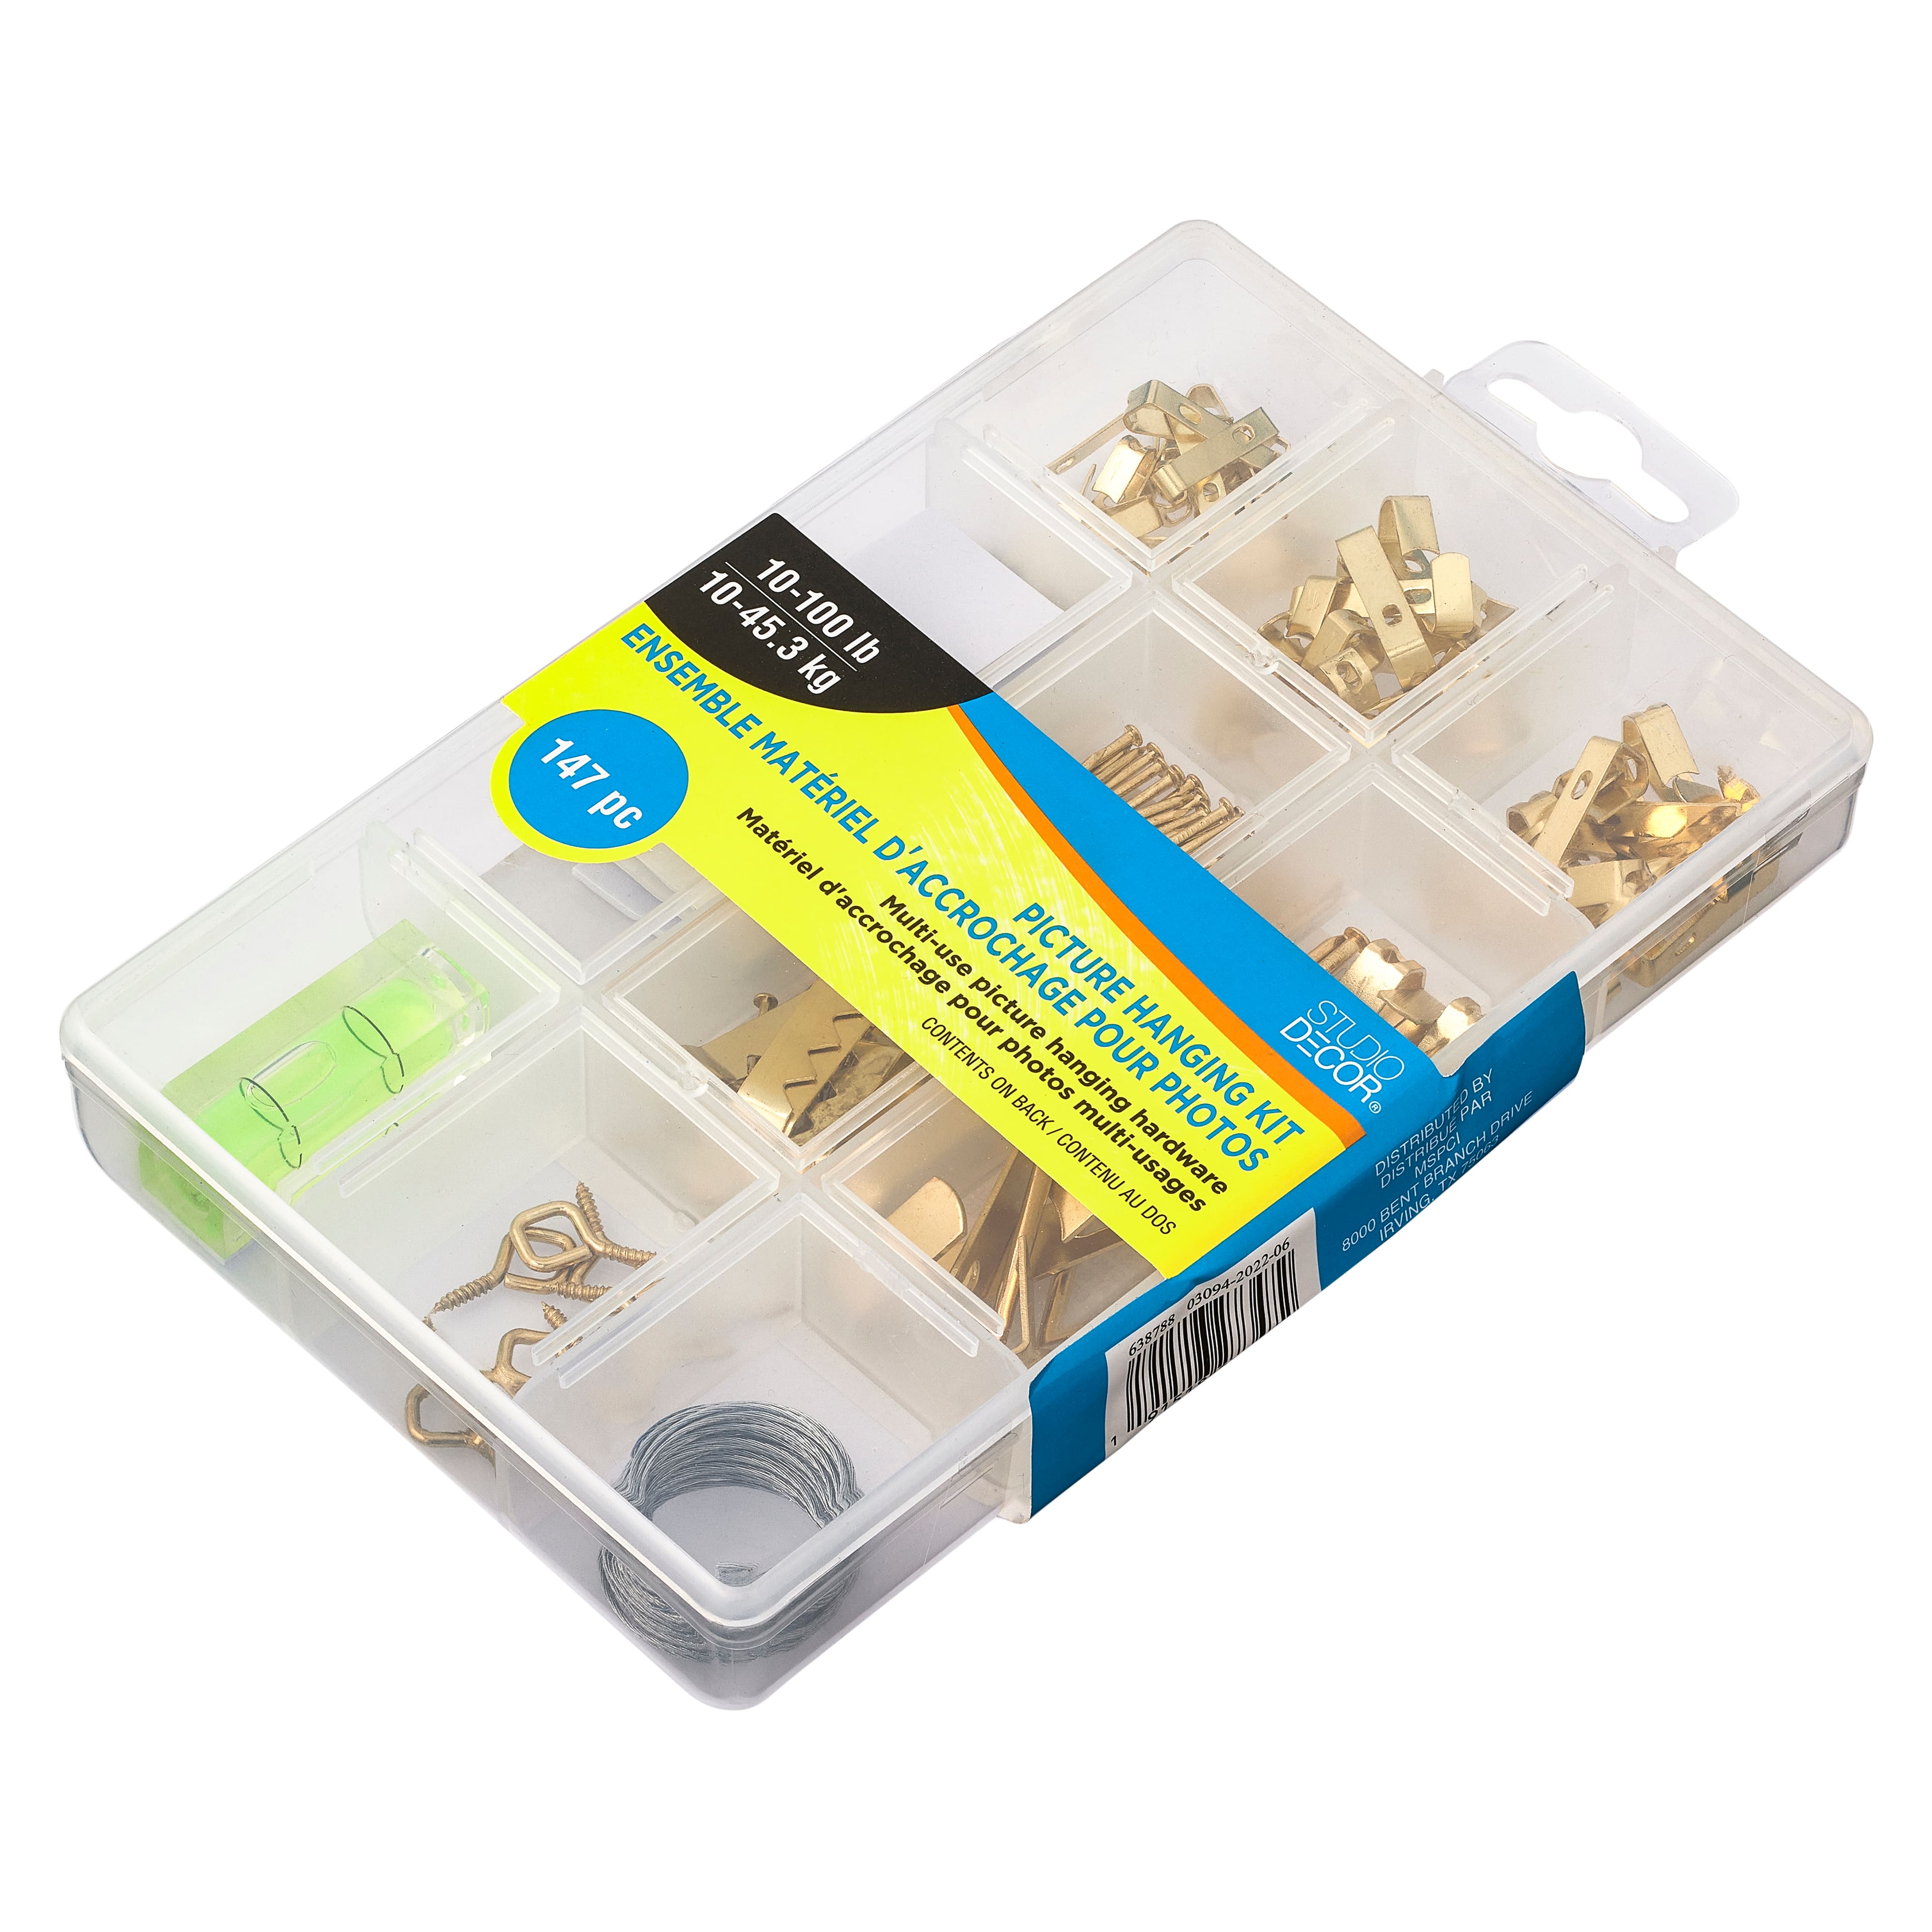 10-100 lb. Gallery Picture Hooks Value Pack